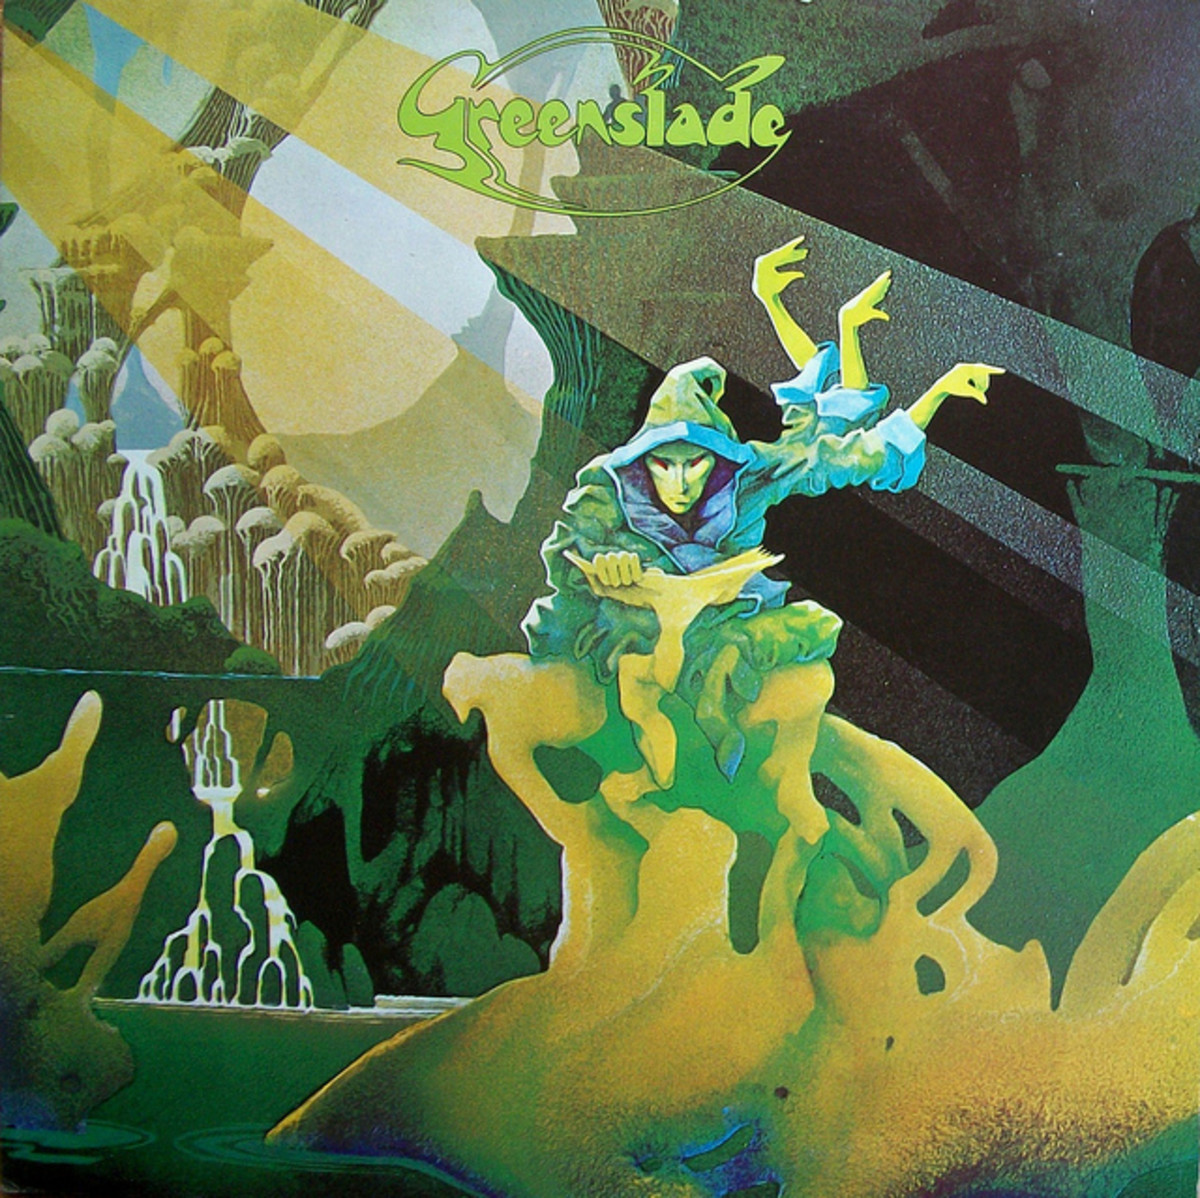 roger dean yes cosmic view 1973 poster amazon